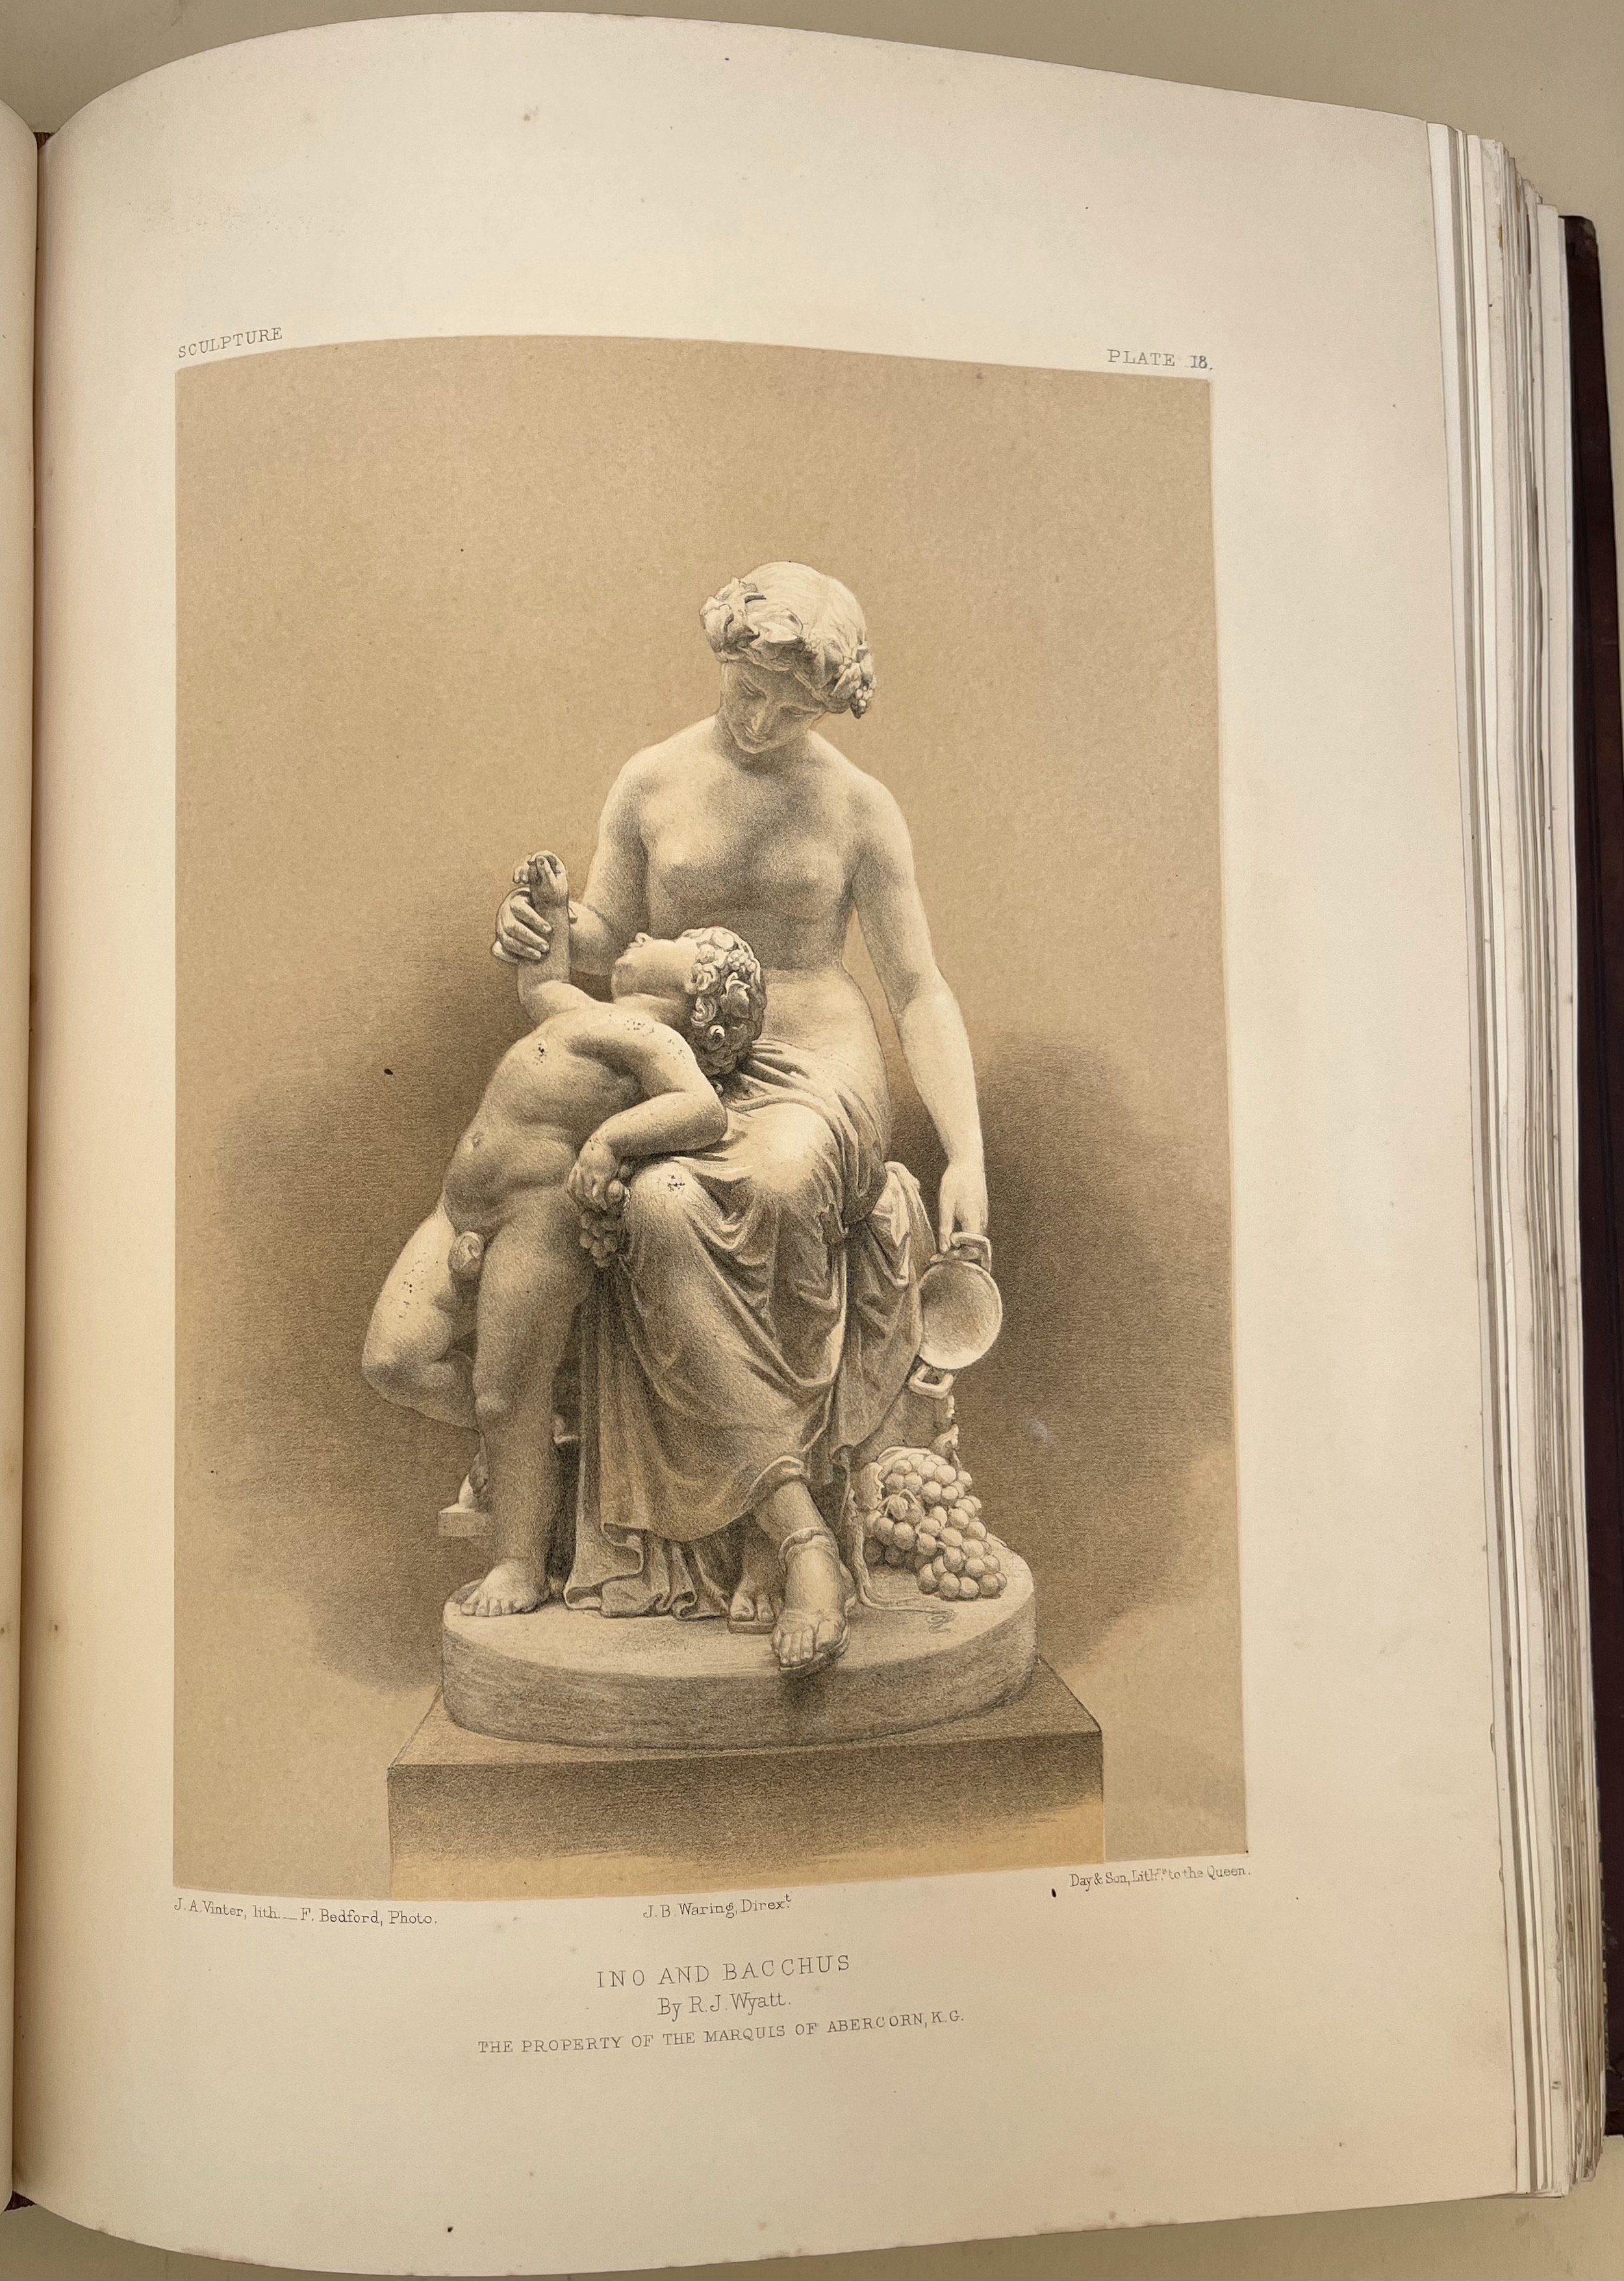 Drawn on stone by J. A. Vinter from a photograph by F. Bedford.